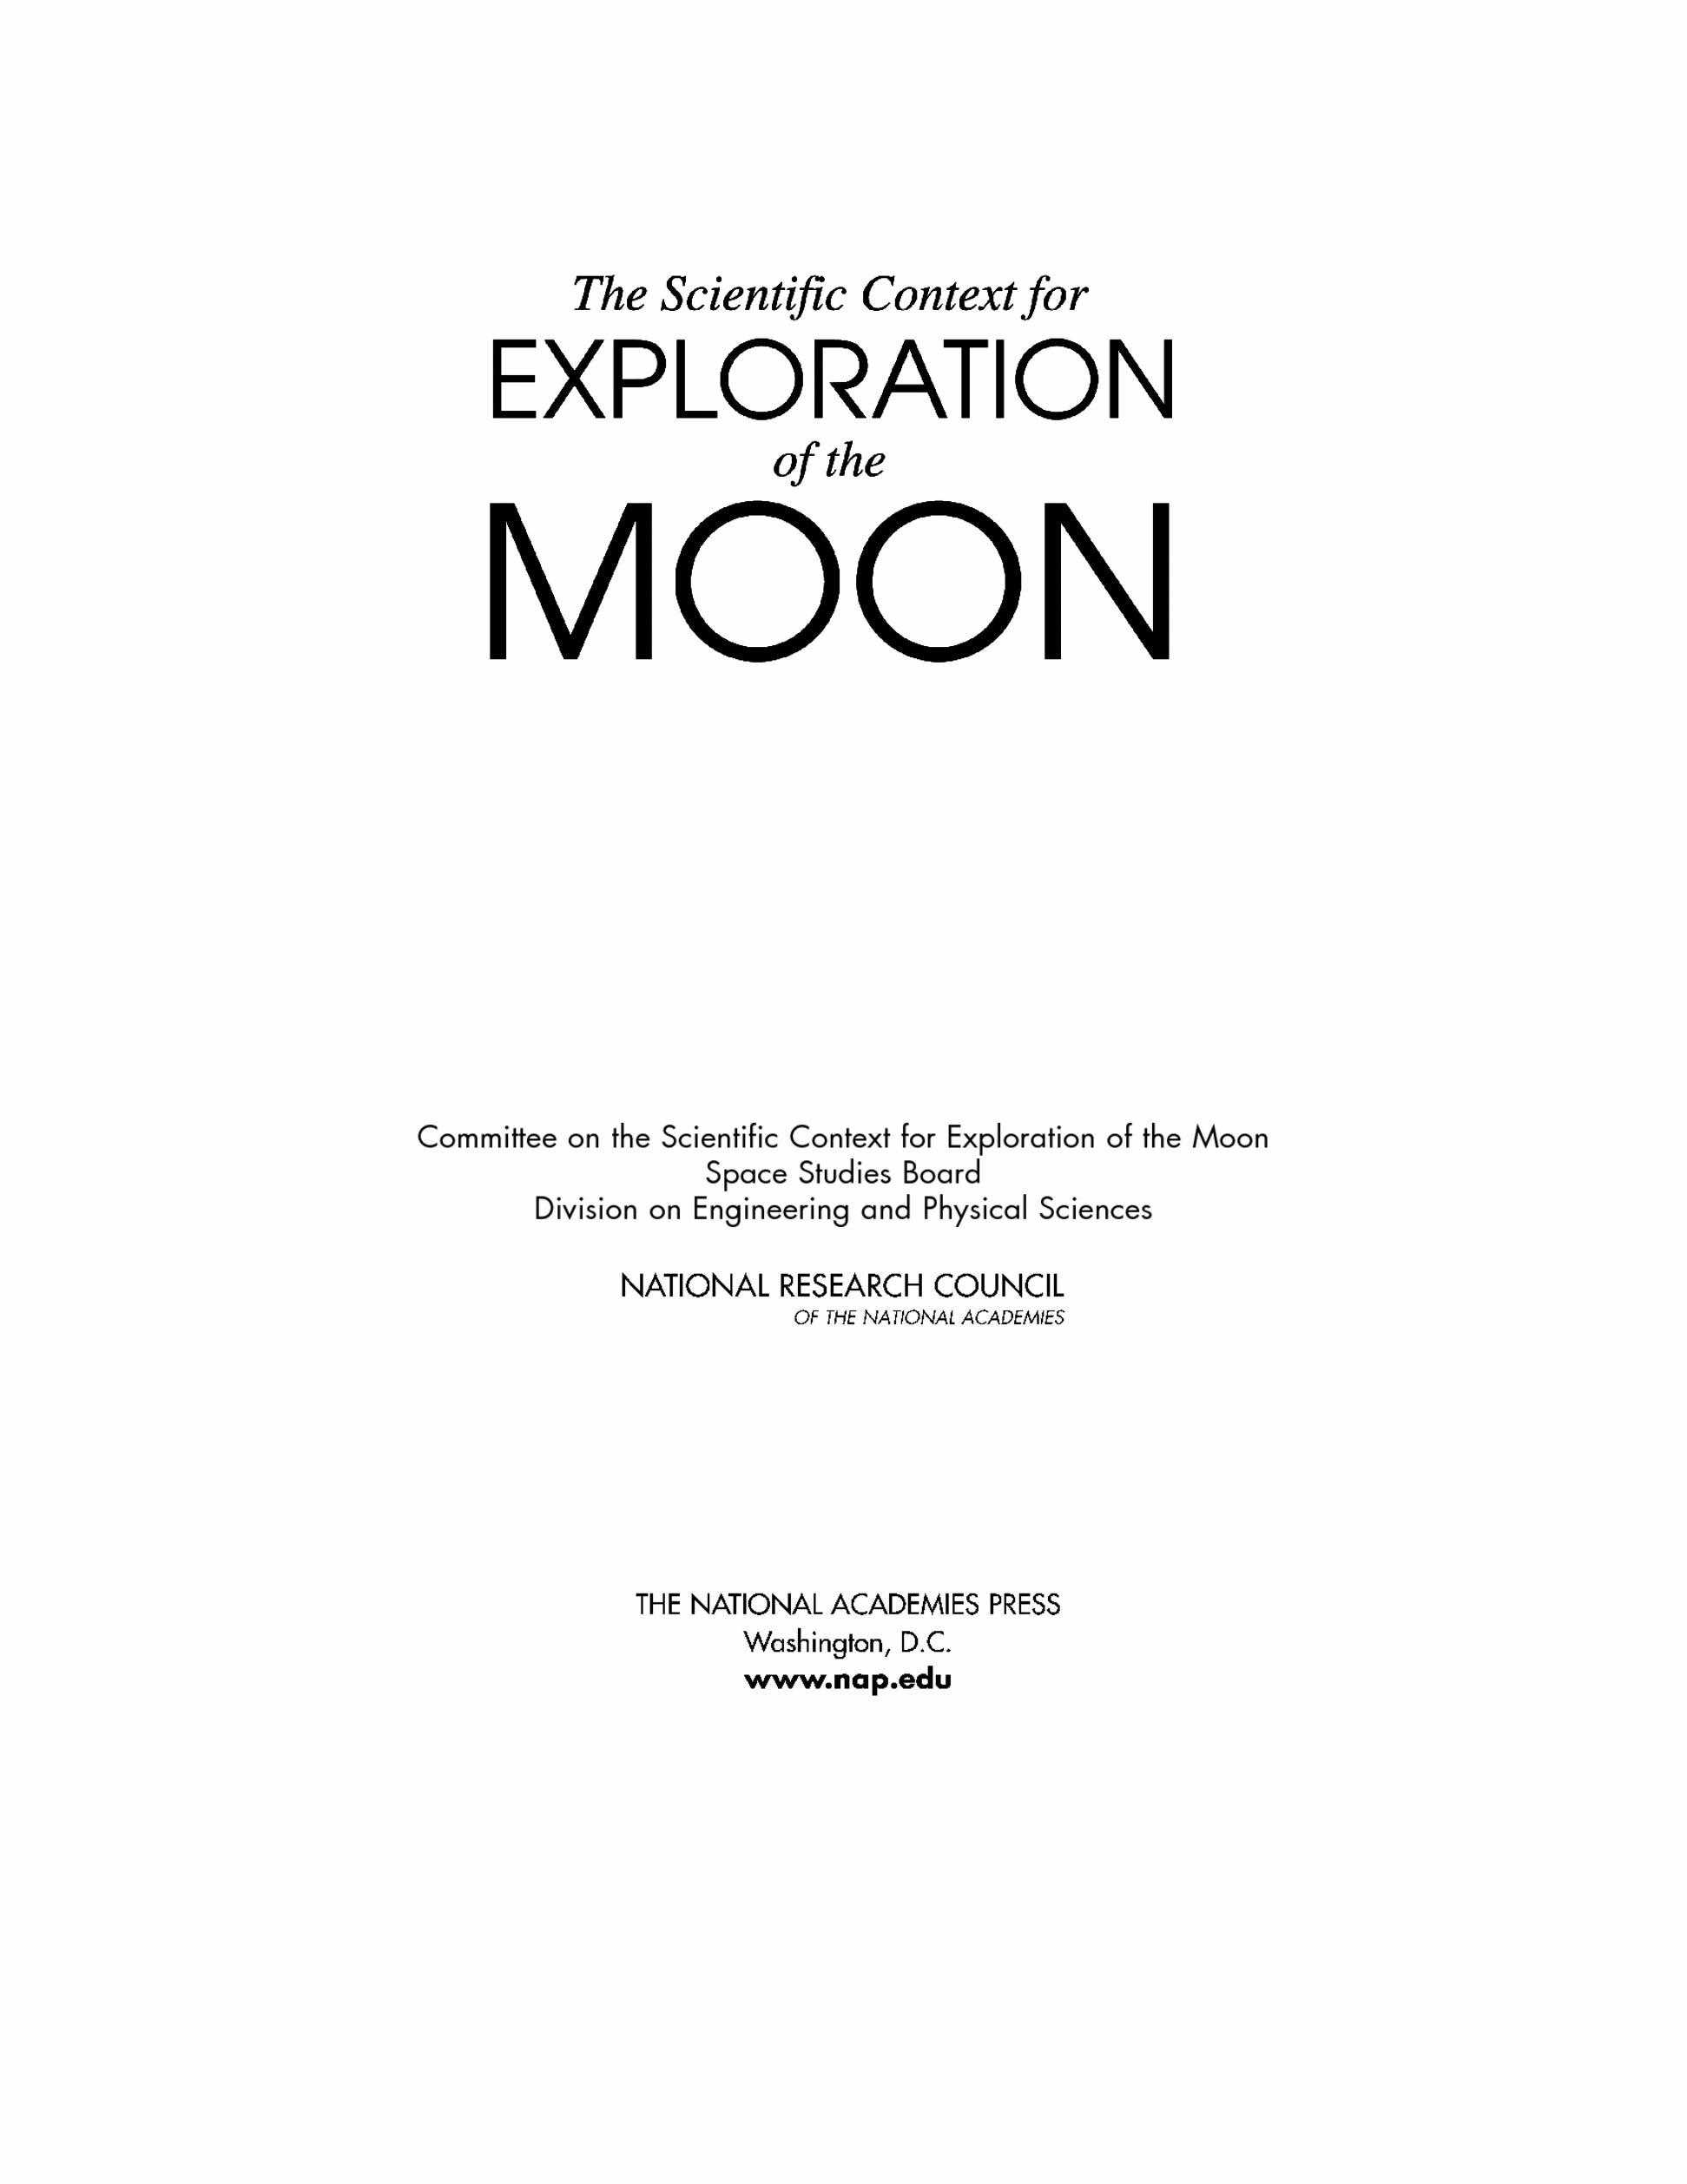 Essay on space exploration